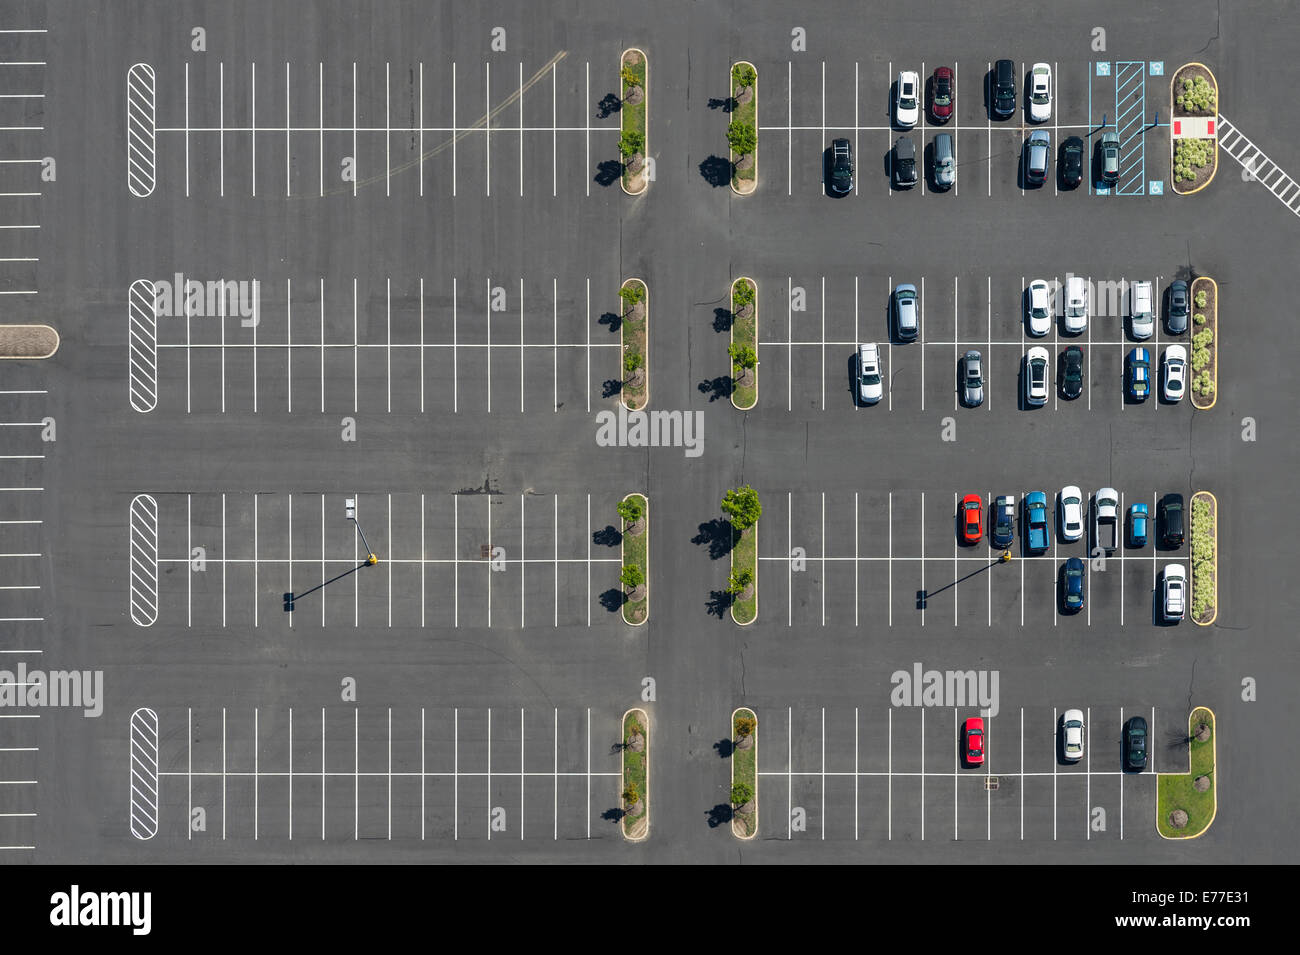 aerial-view-of-parking-lot-abstract-E77E31.jpg